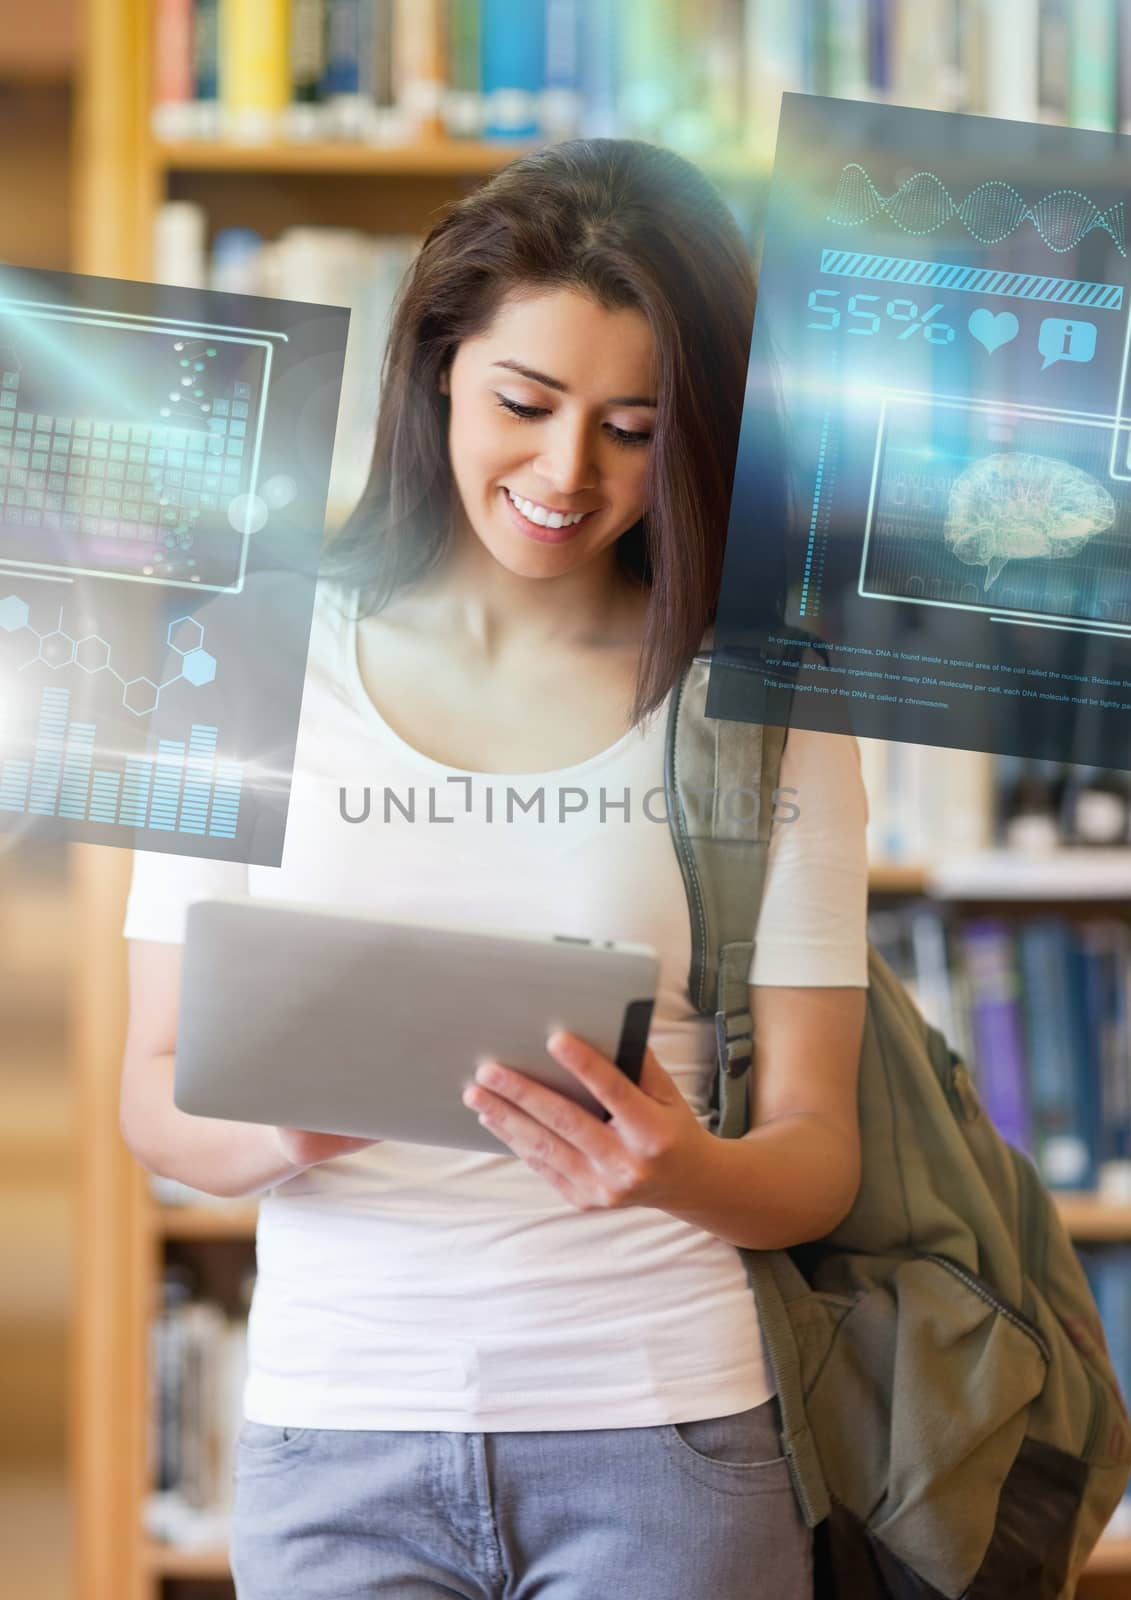 Digital composite of Female Student studying with tablet and science education interface graphics overlay